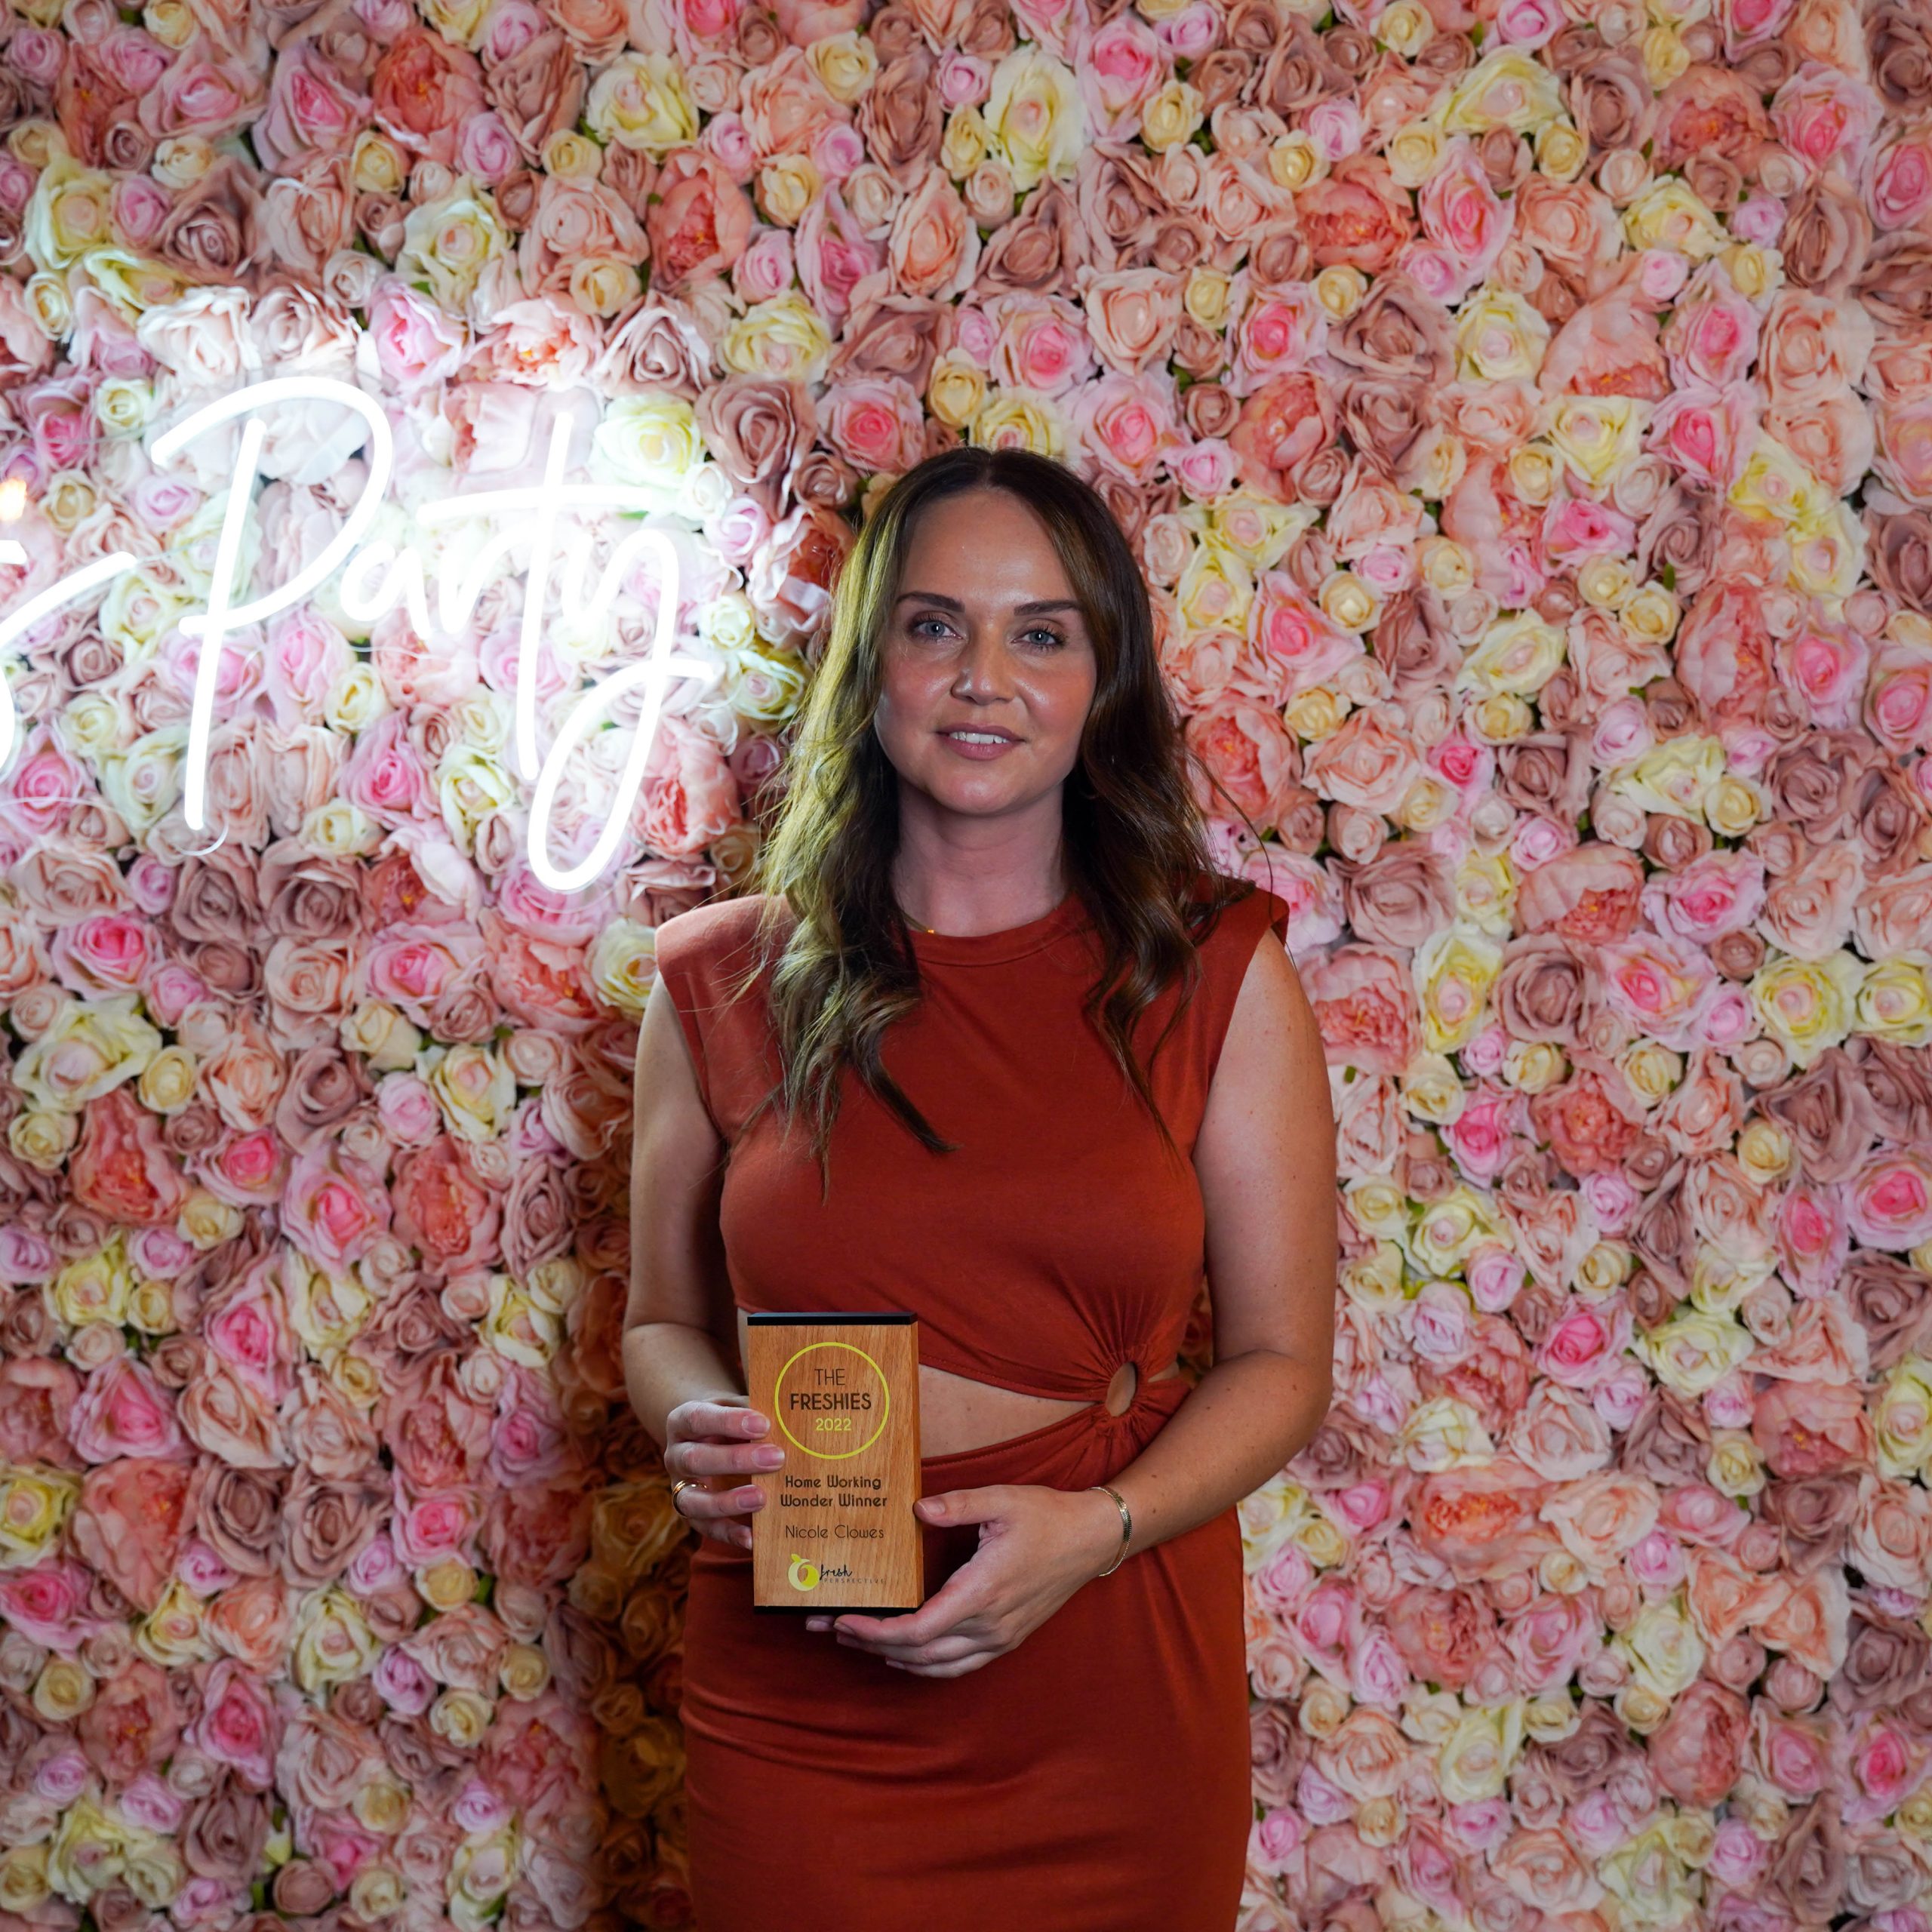 The Freshies 2022 Home Working Wonder award winner Nicole Clowes, stood in front of a pink floral wall with a neon sign. She is holding her award.